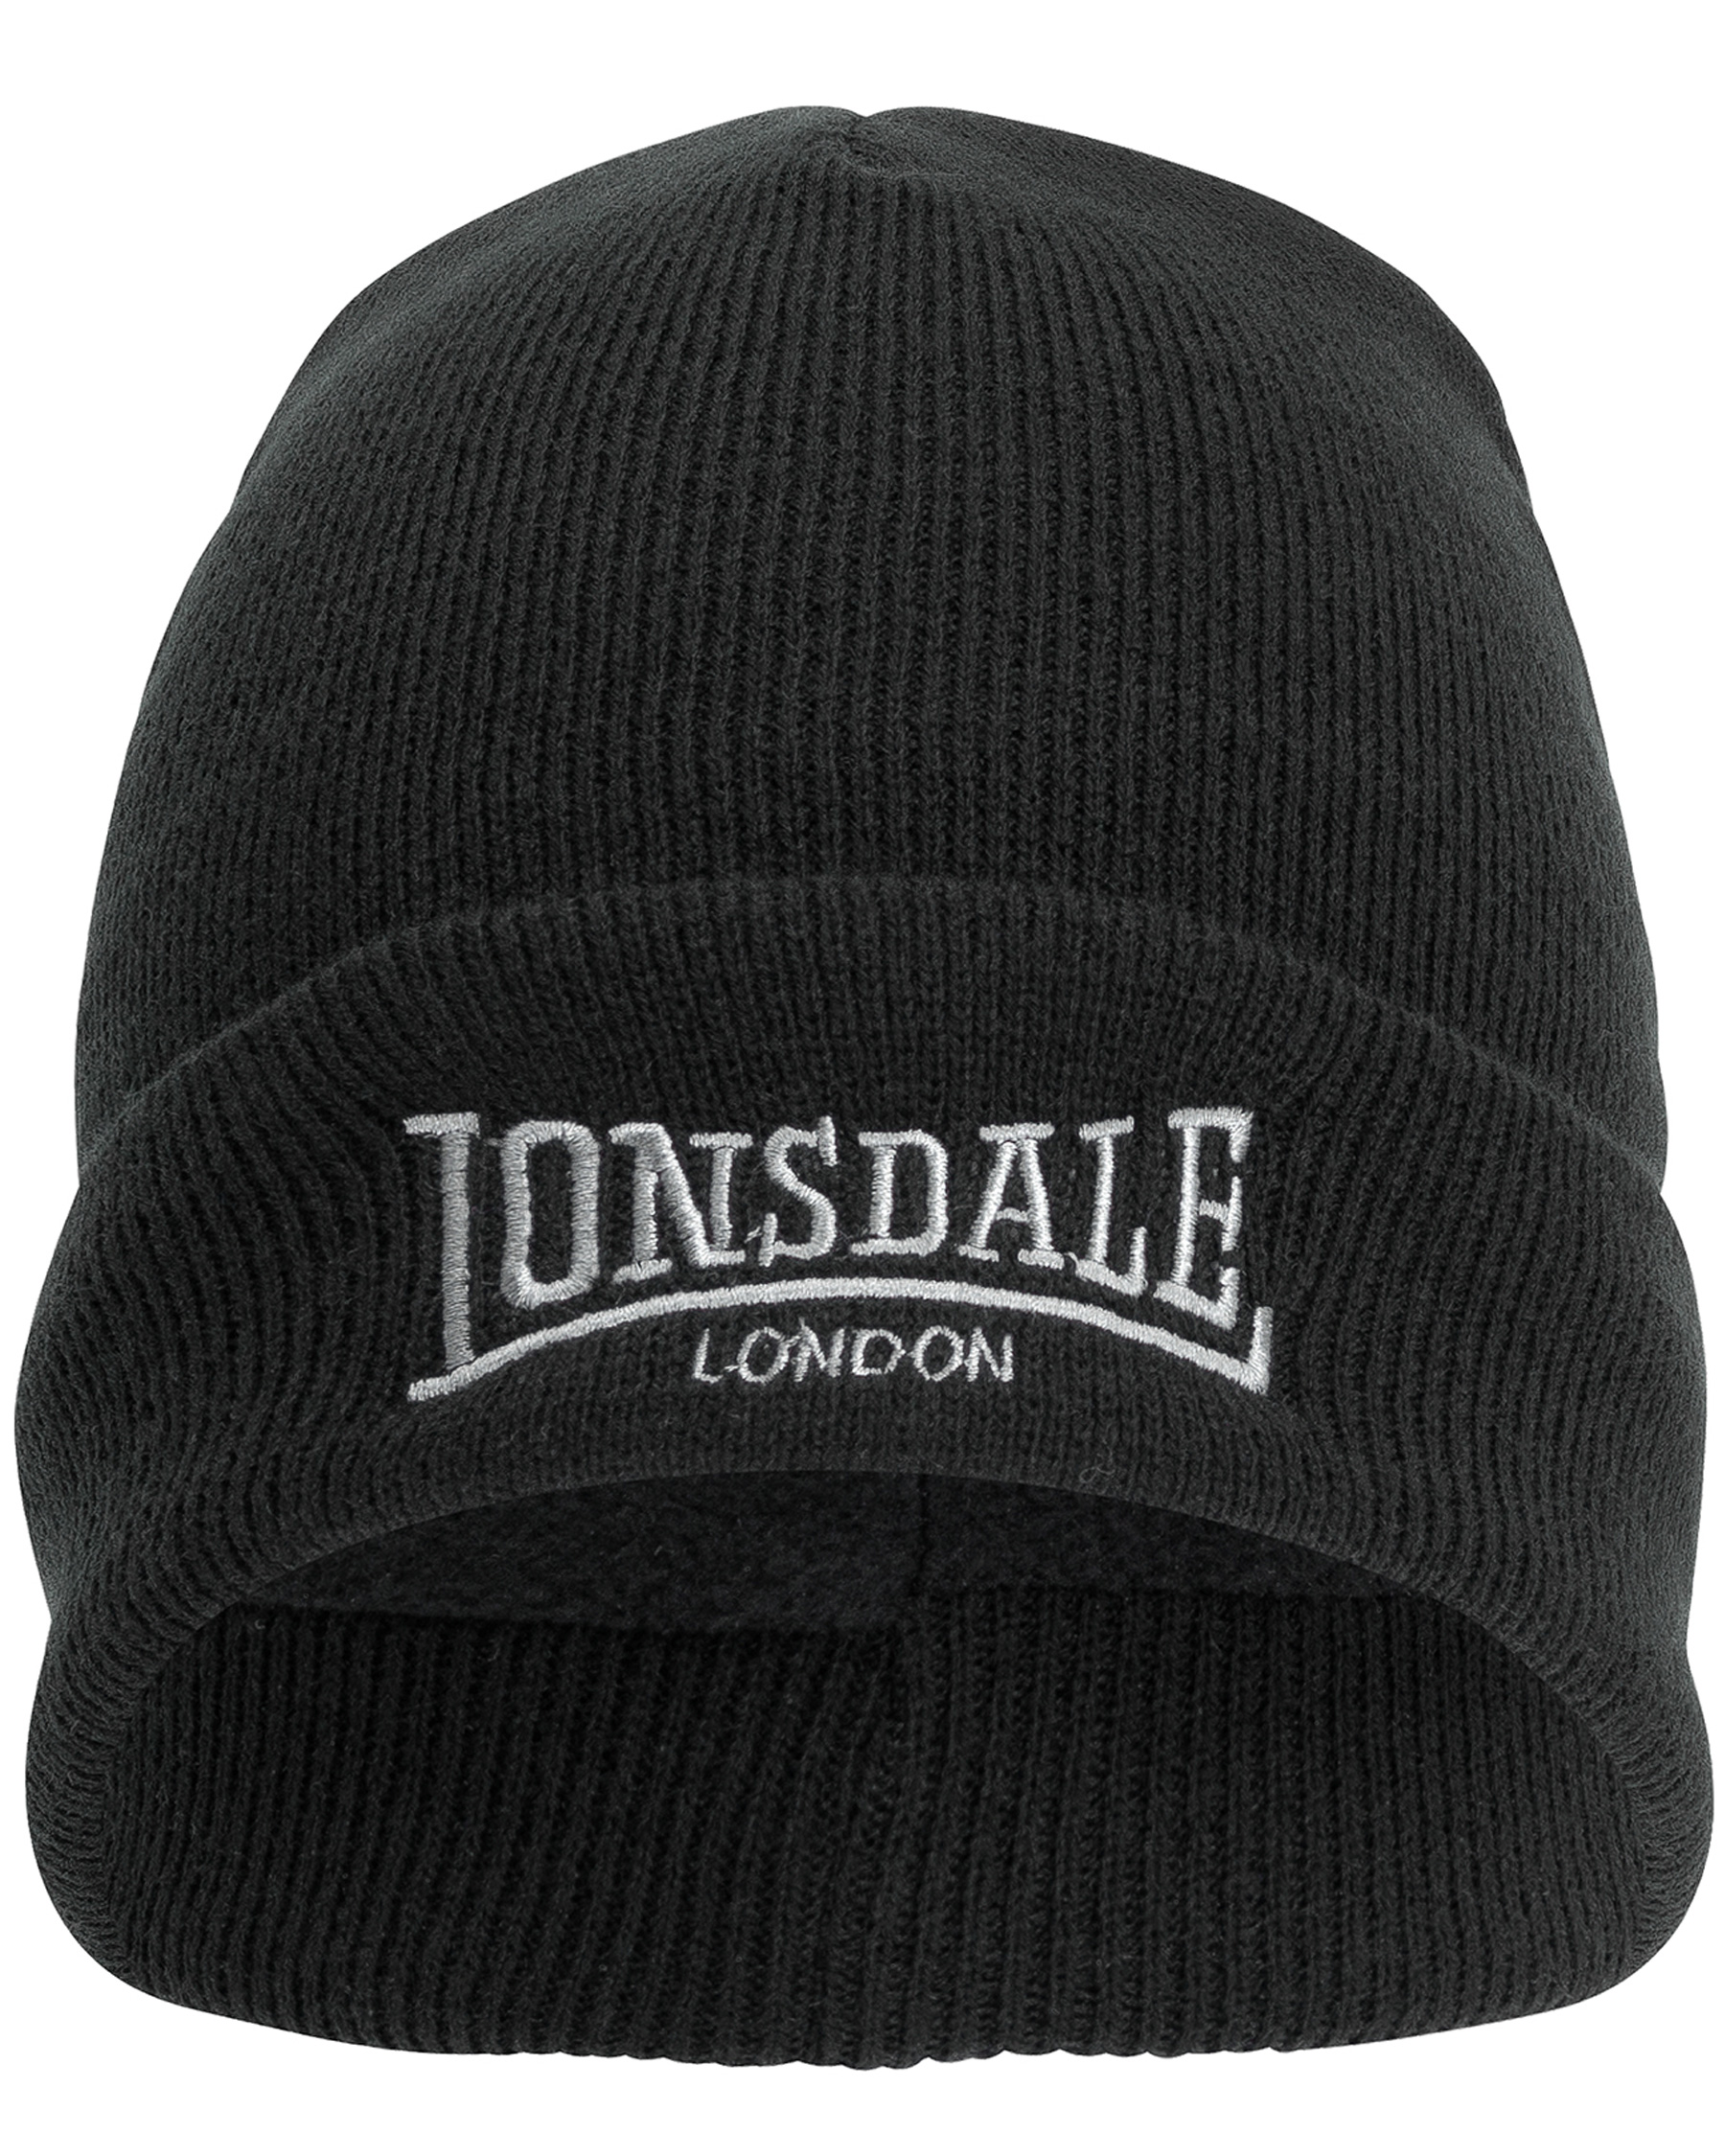 Lonsdale beannie Dundee - Mens Accessories - Lonsdale London